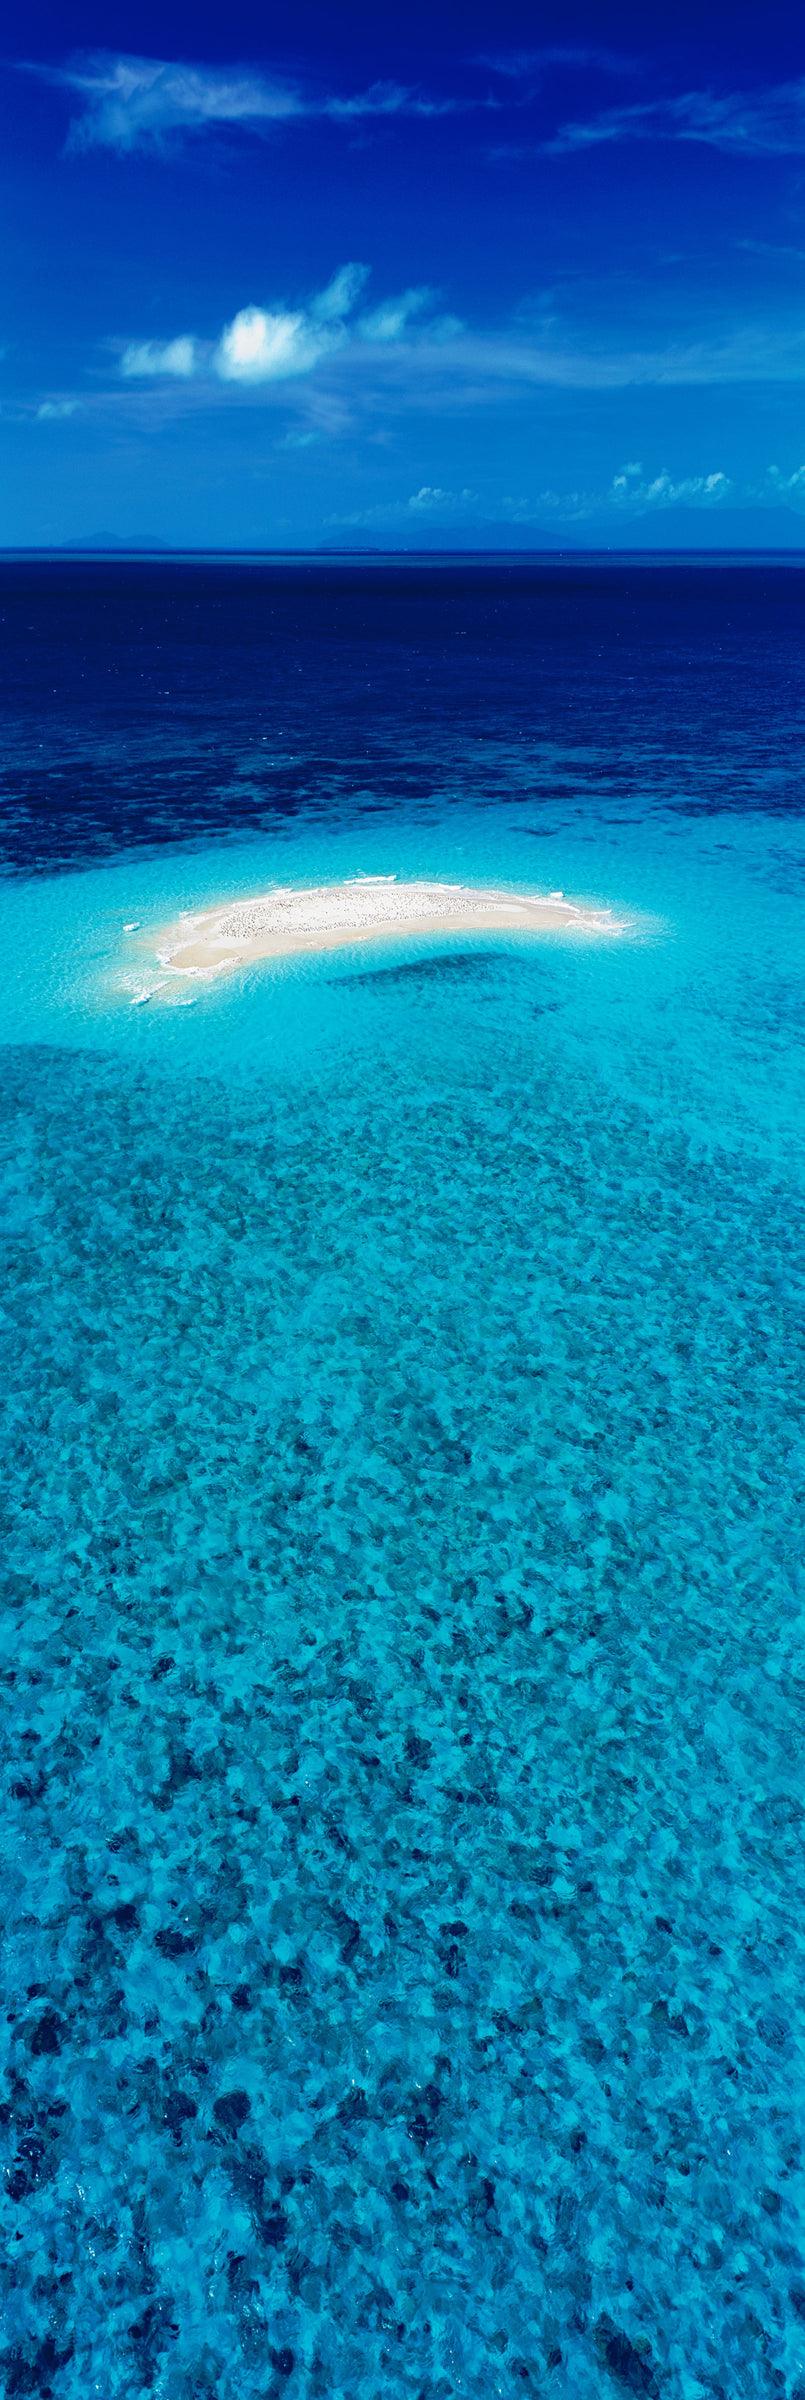 Aerial view of the blue ocean and a small white sand island in off the Great Barrier Reef Australia